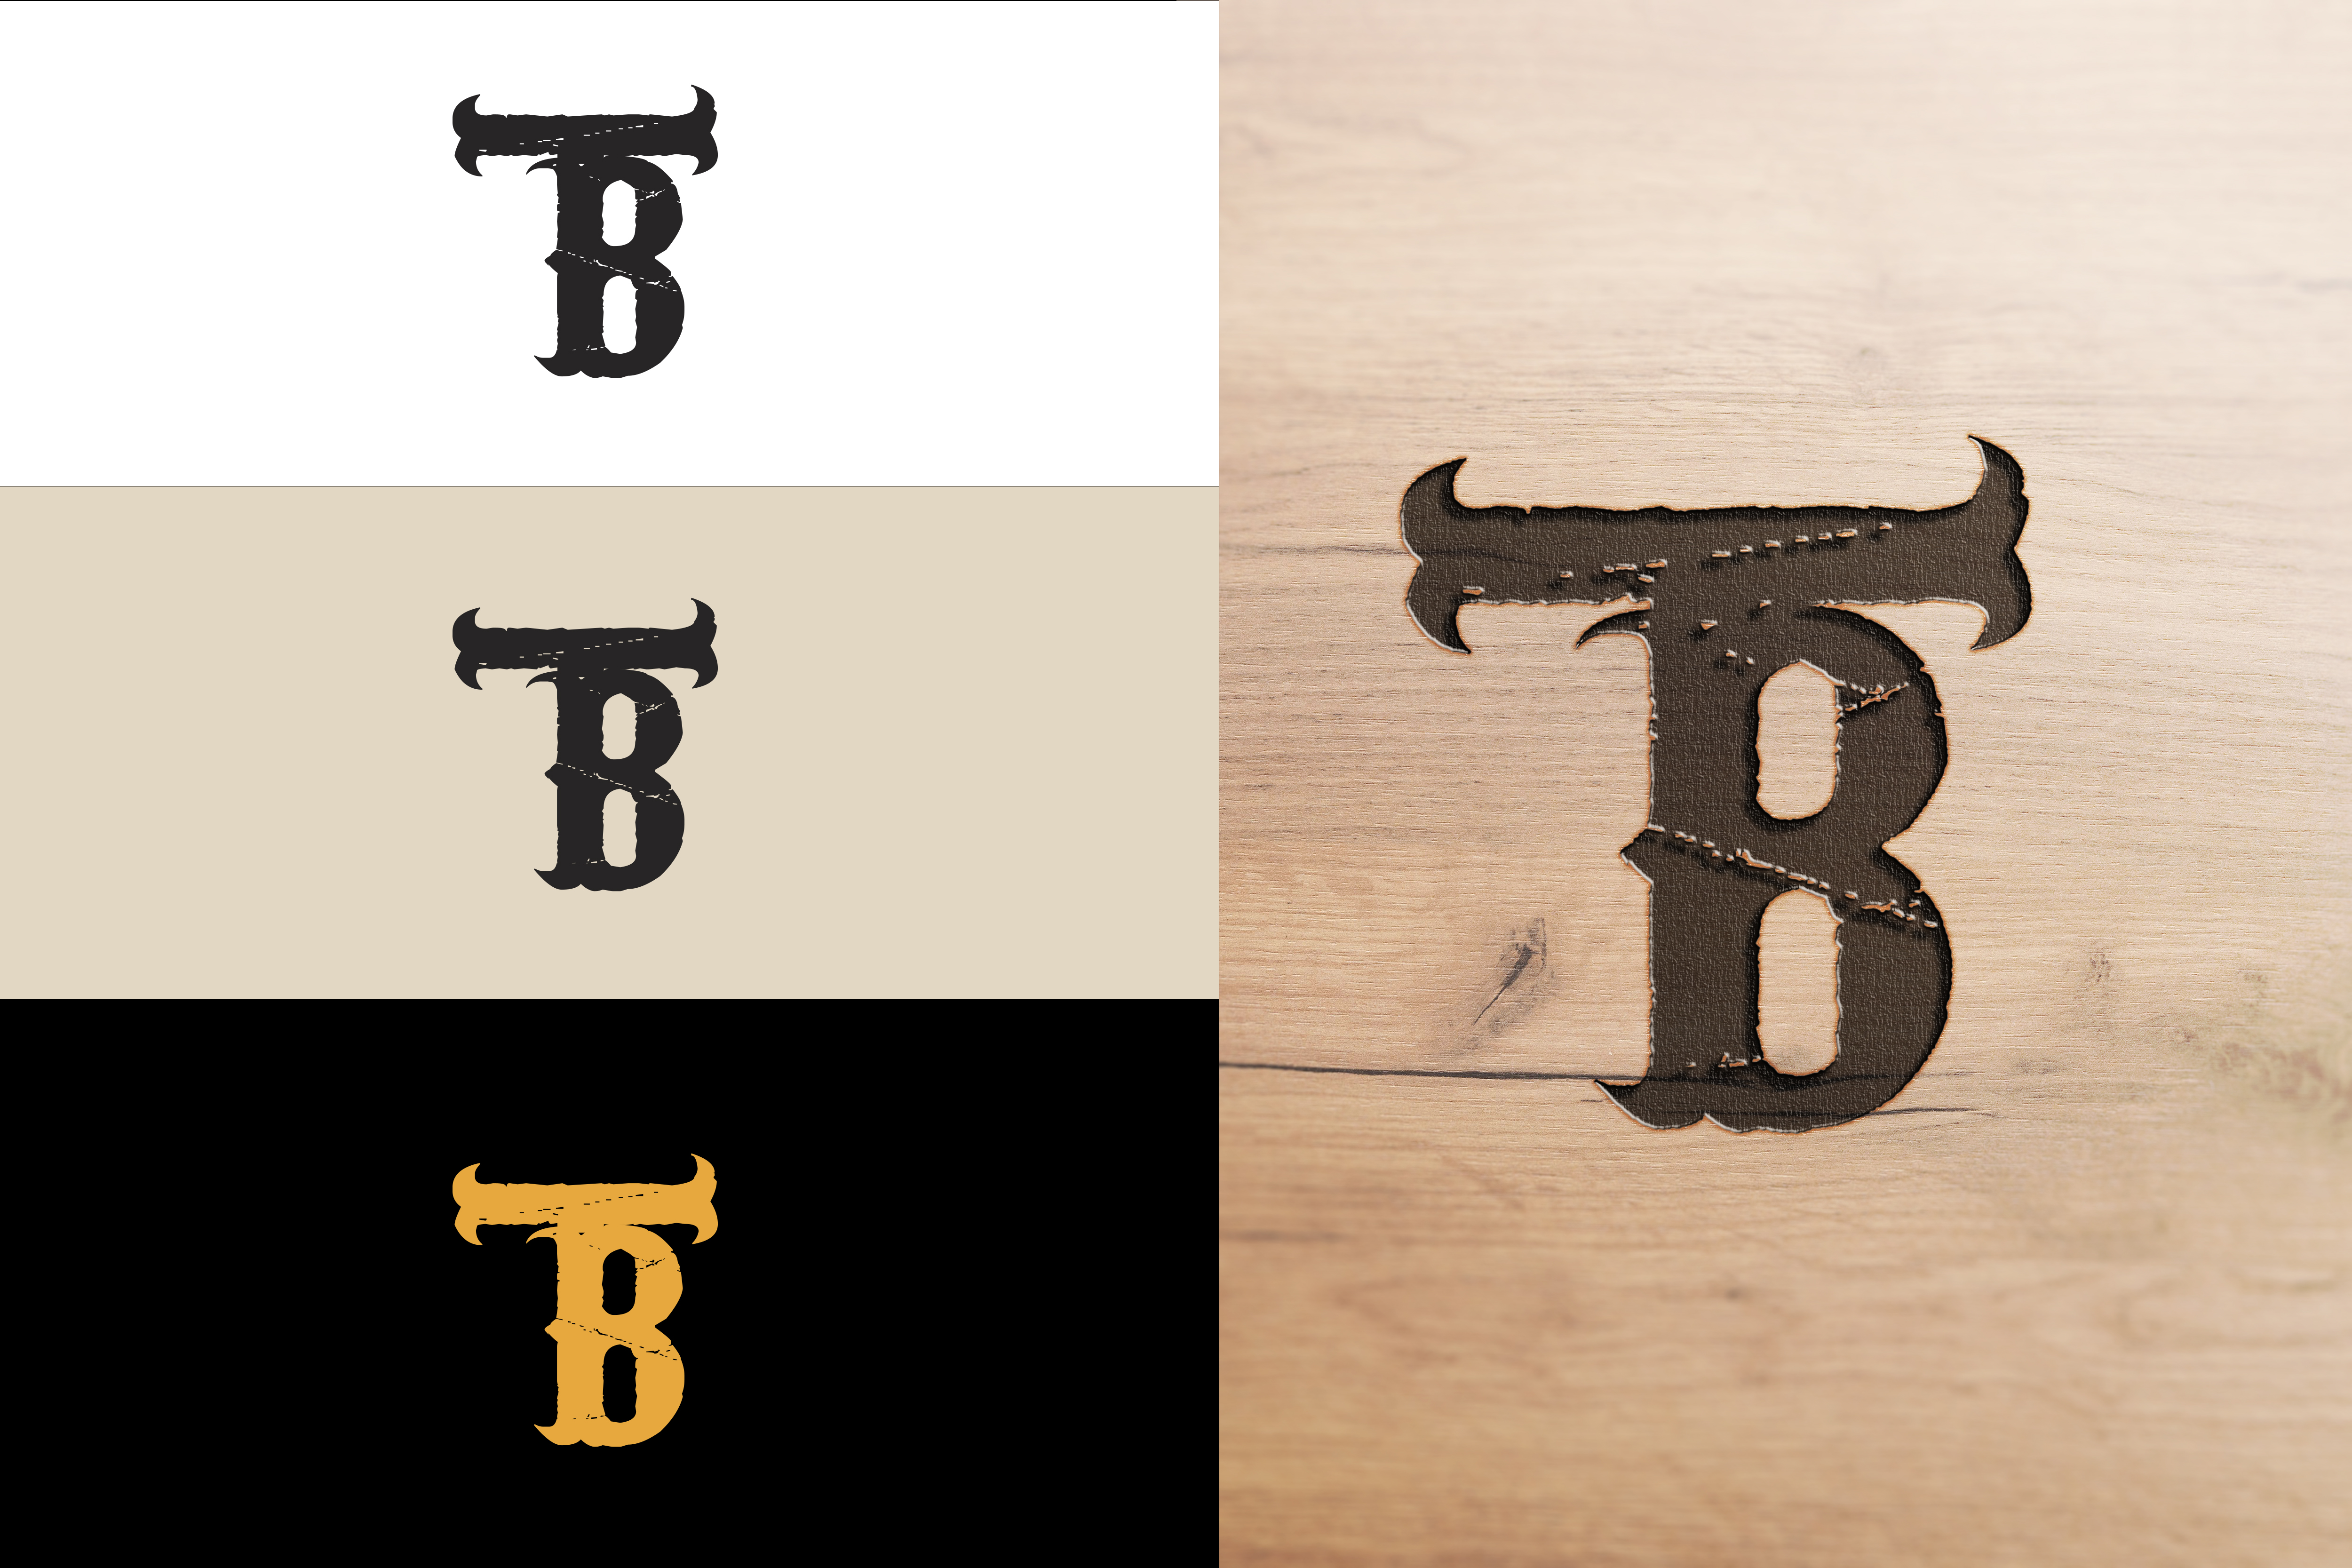 Design western style cattle brand logo for your ranch by Shahalam247